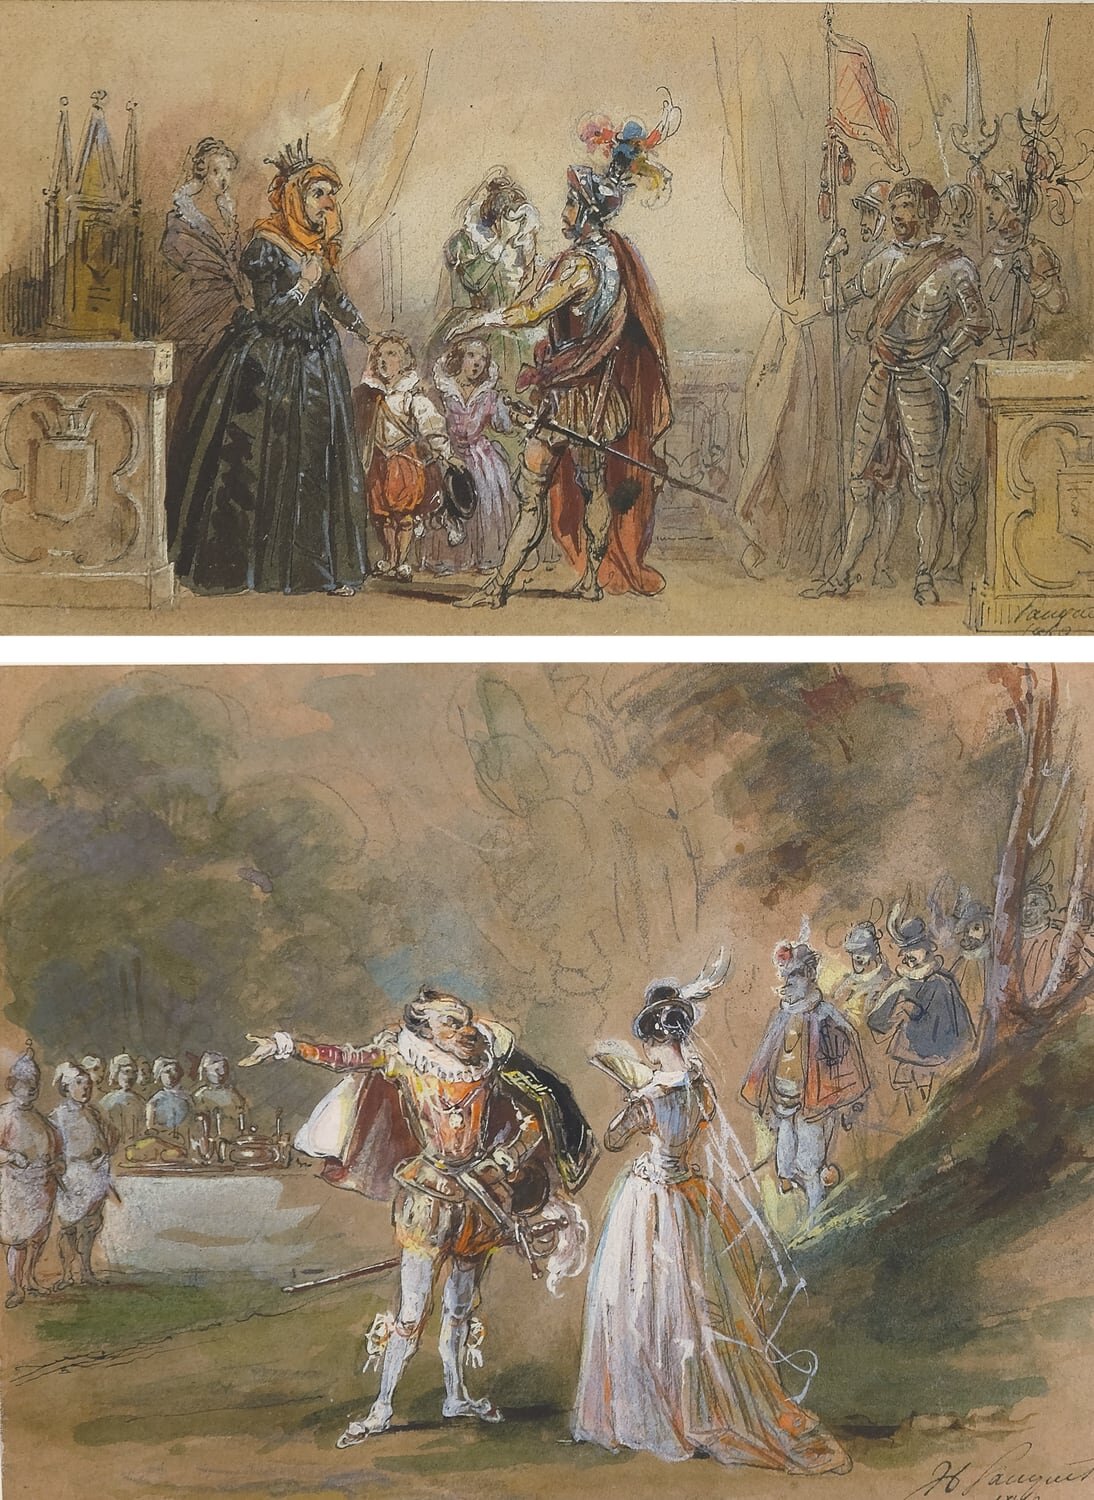  Watercolours by Hippolyte Pauquet for Charles Perrault’s Tales and Stories of the Past with Morals (Histoires ou contes du temps passé) [no. 494]. 